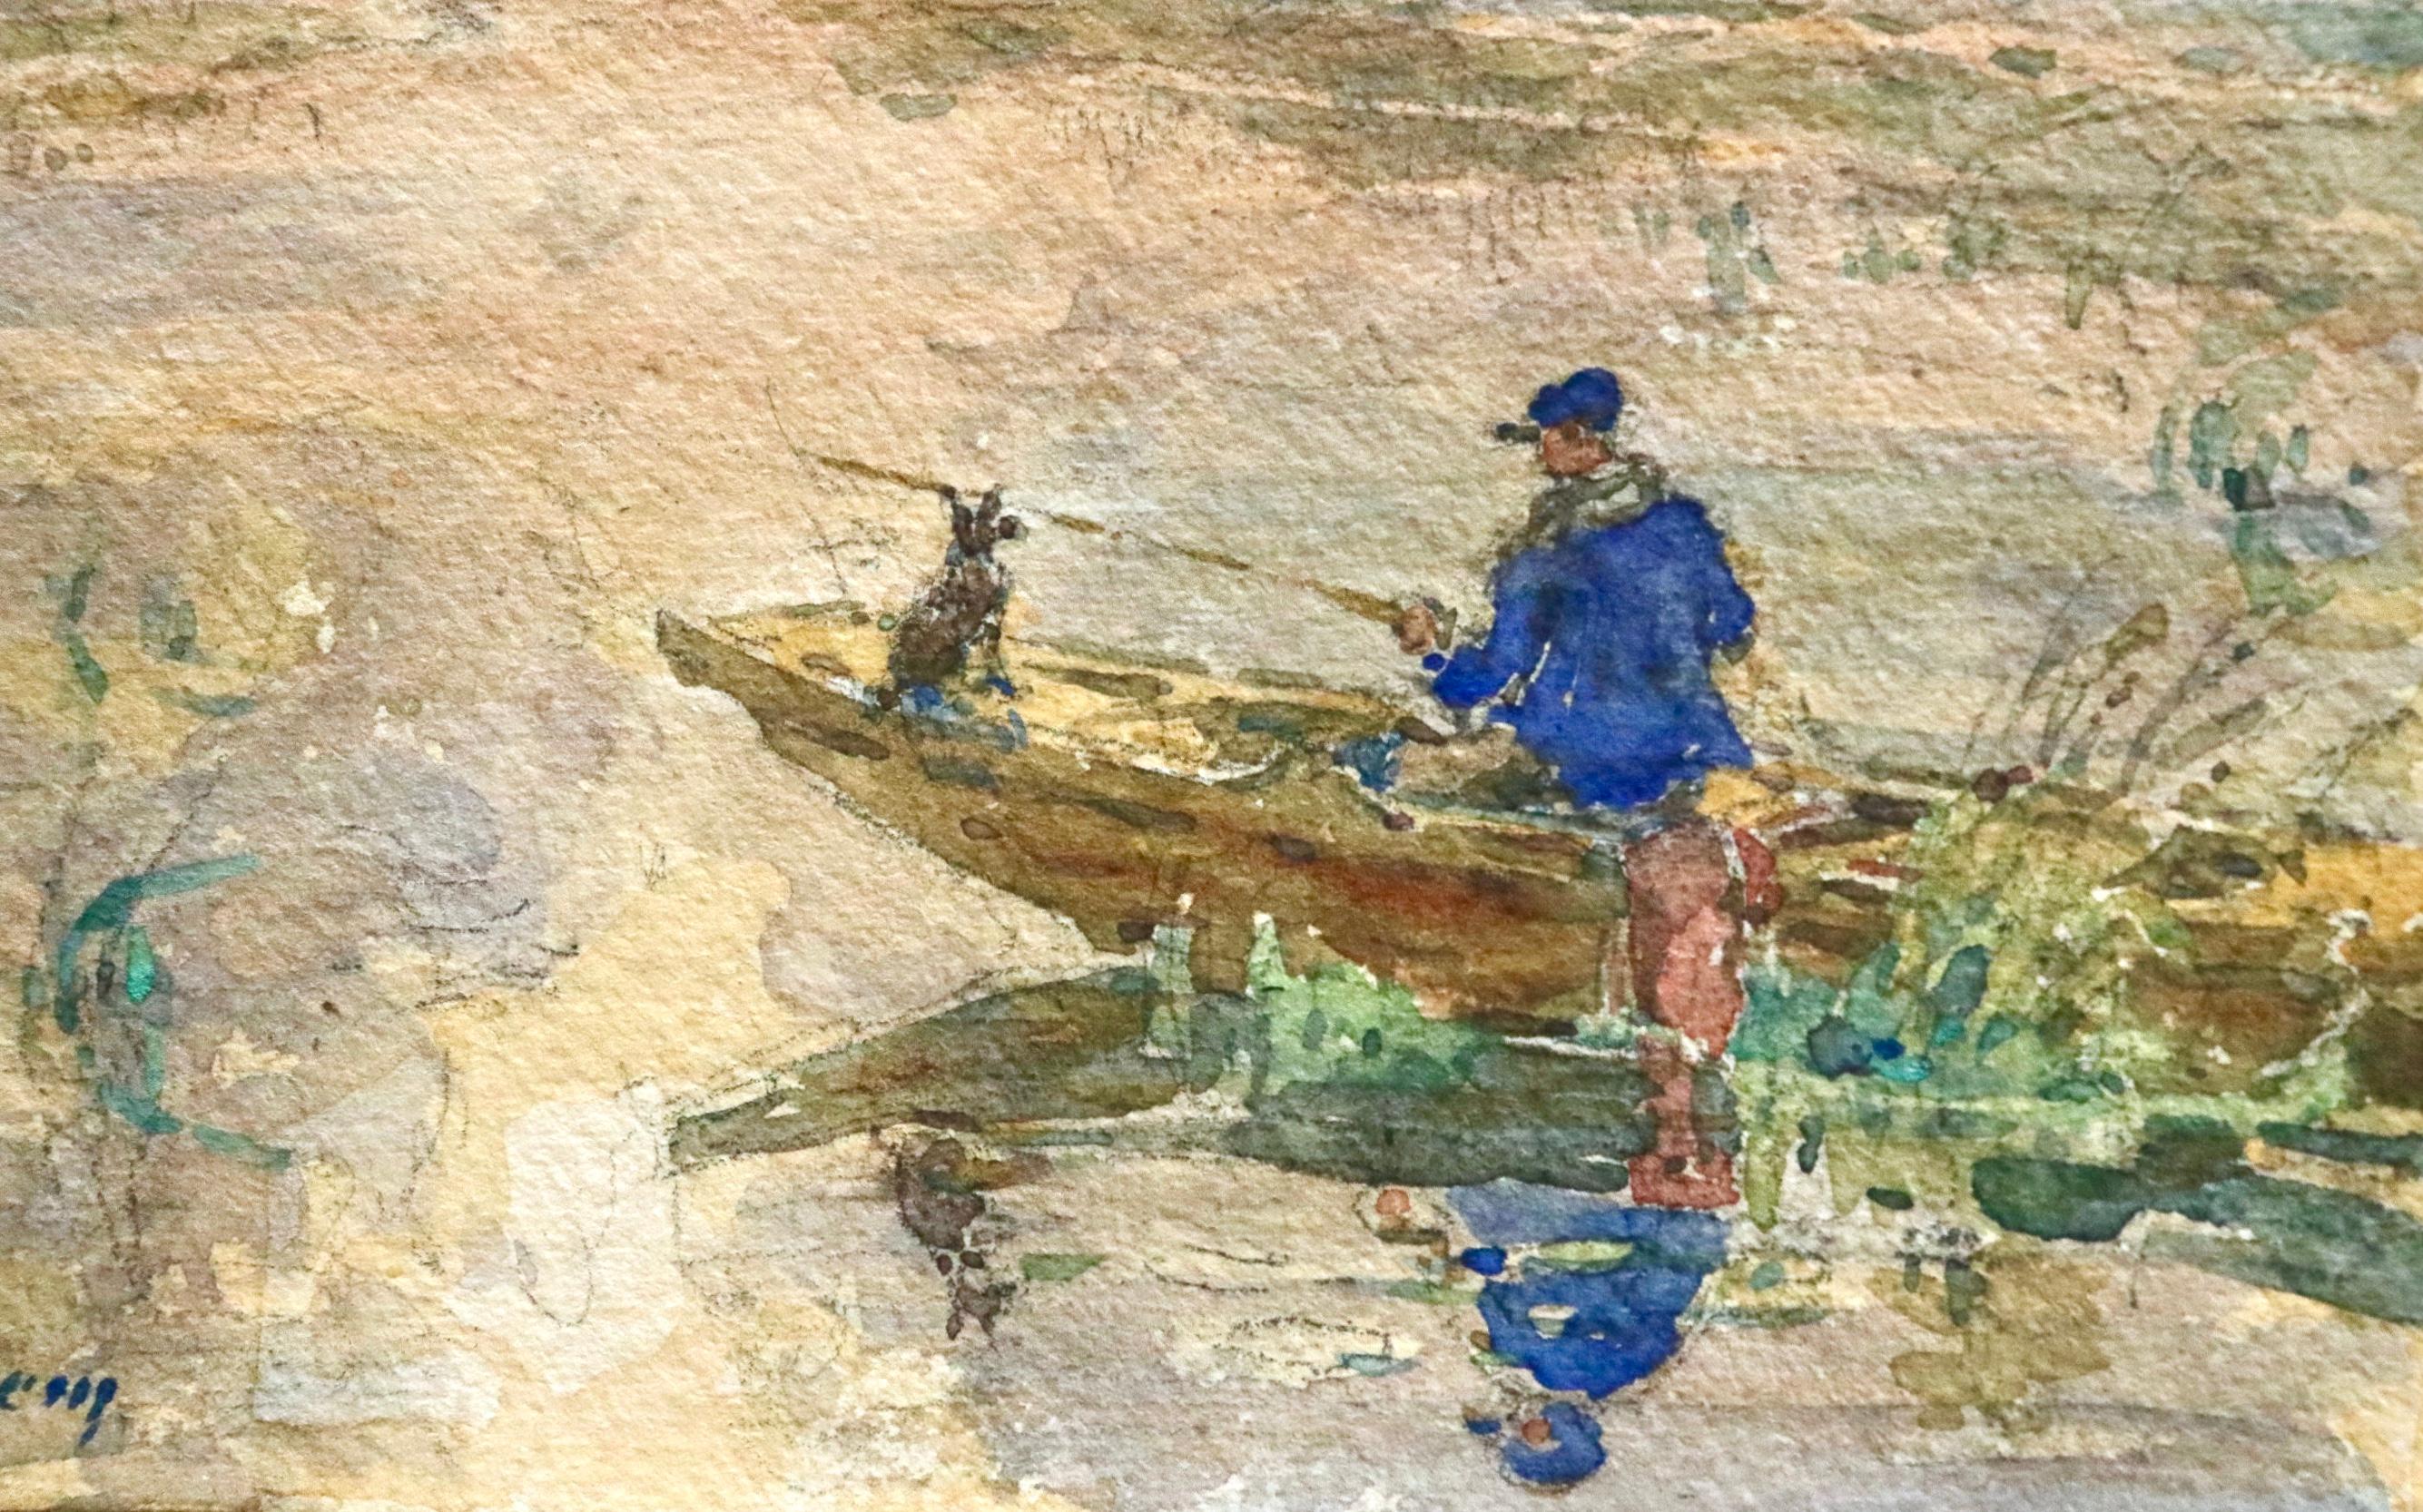 Watercolour on paper circa 1910 by Henri Duhem depicting a man fishing in a boat on the river accompanied by his dog. Signed lower left. This painting is not currently framed but a suitable frame can be sourced if required.

Descendant of an old